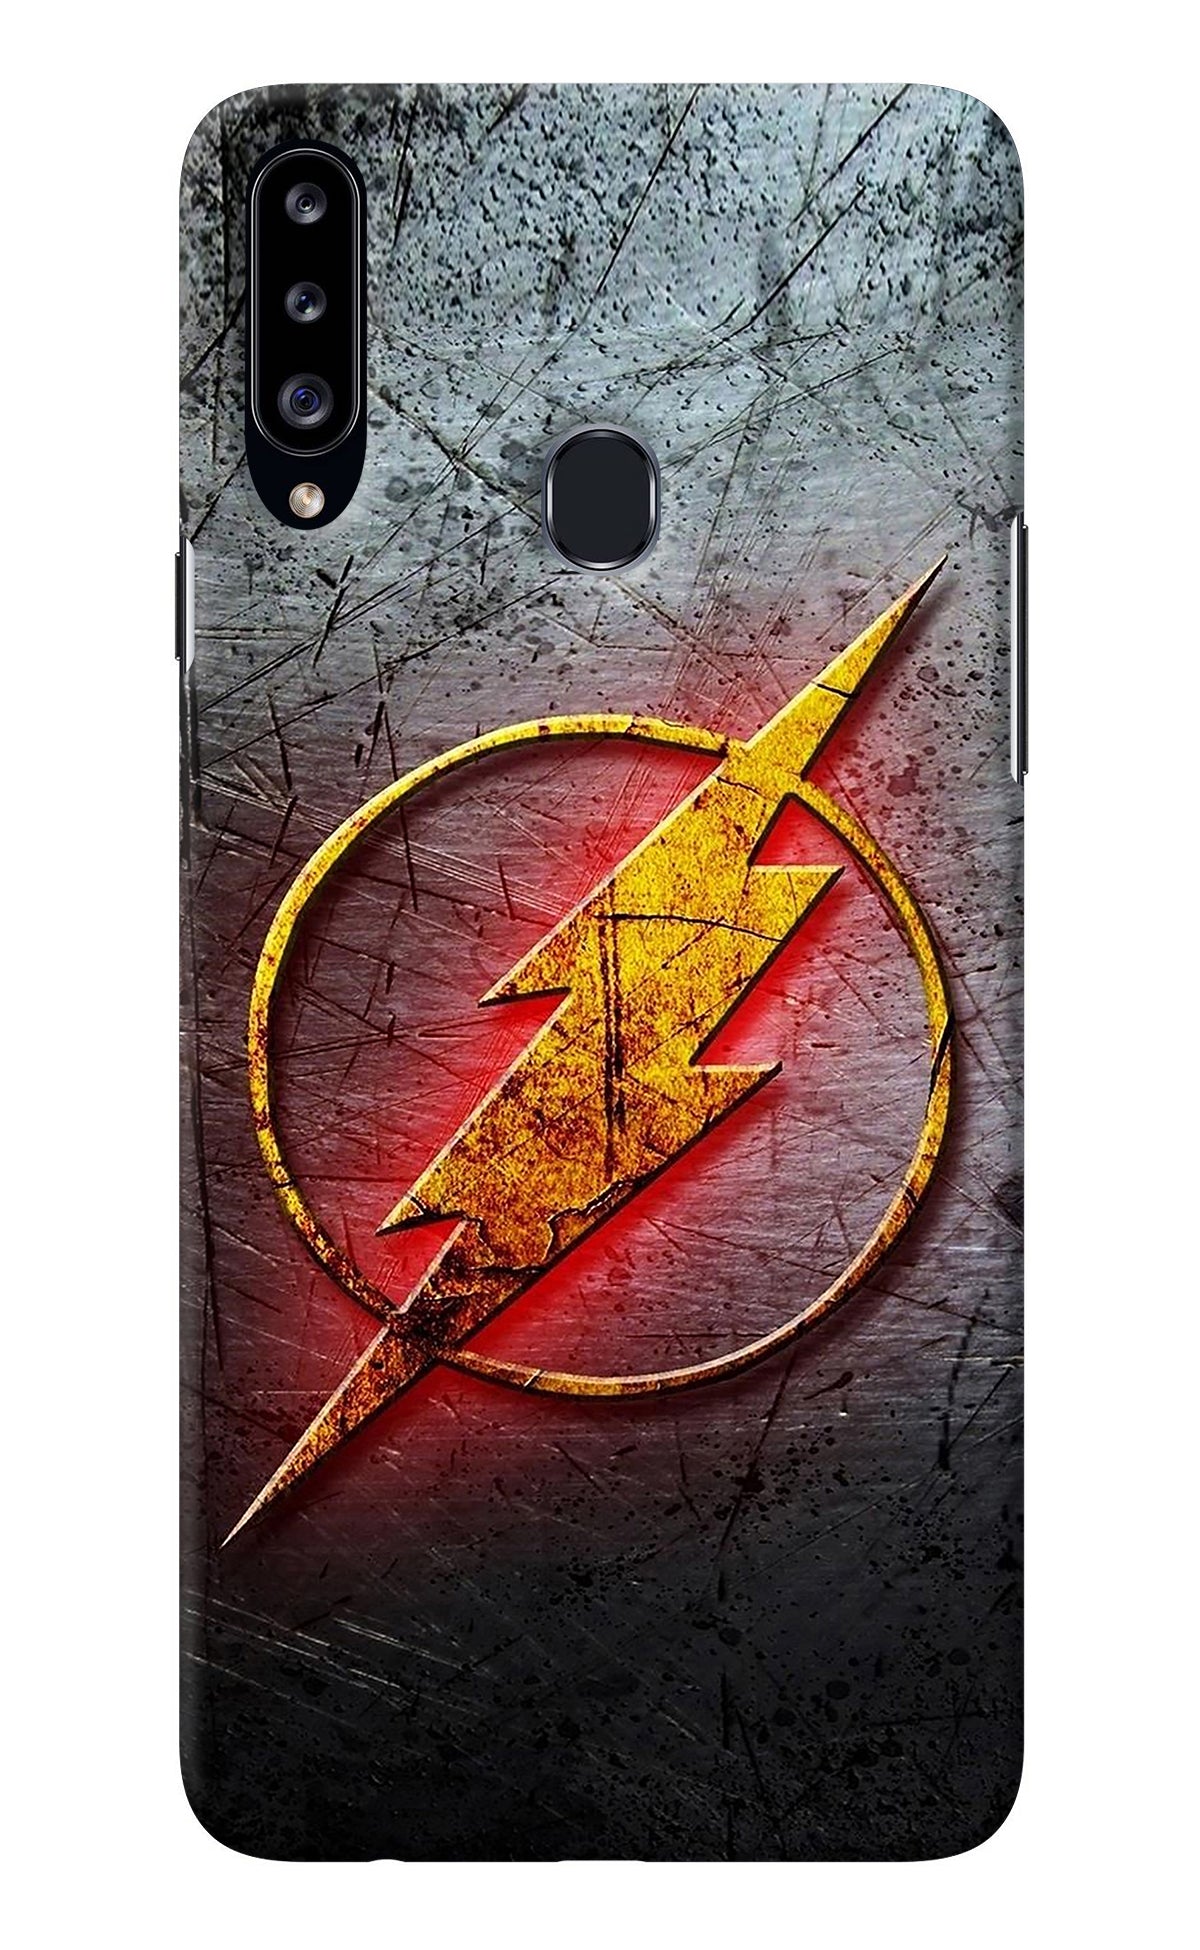 Flash Samsung A20s Back Cover